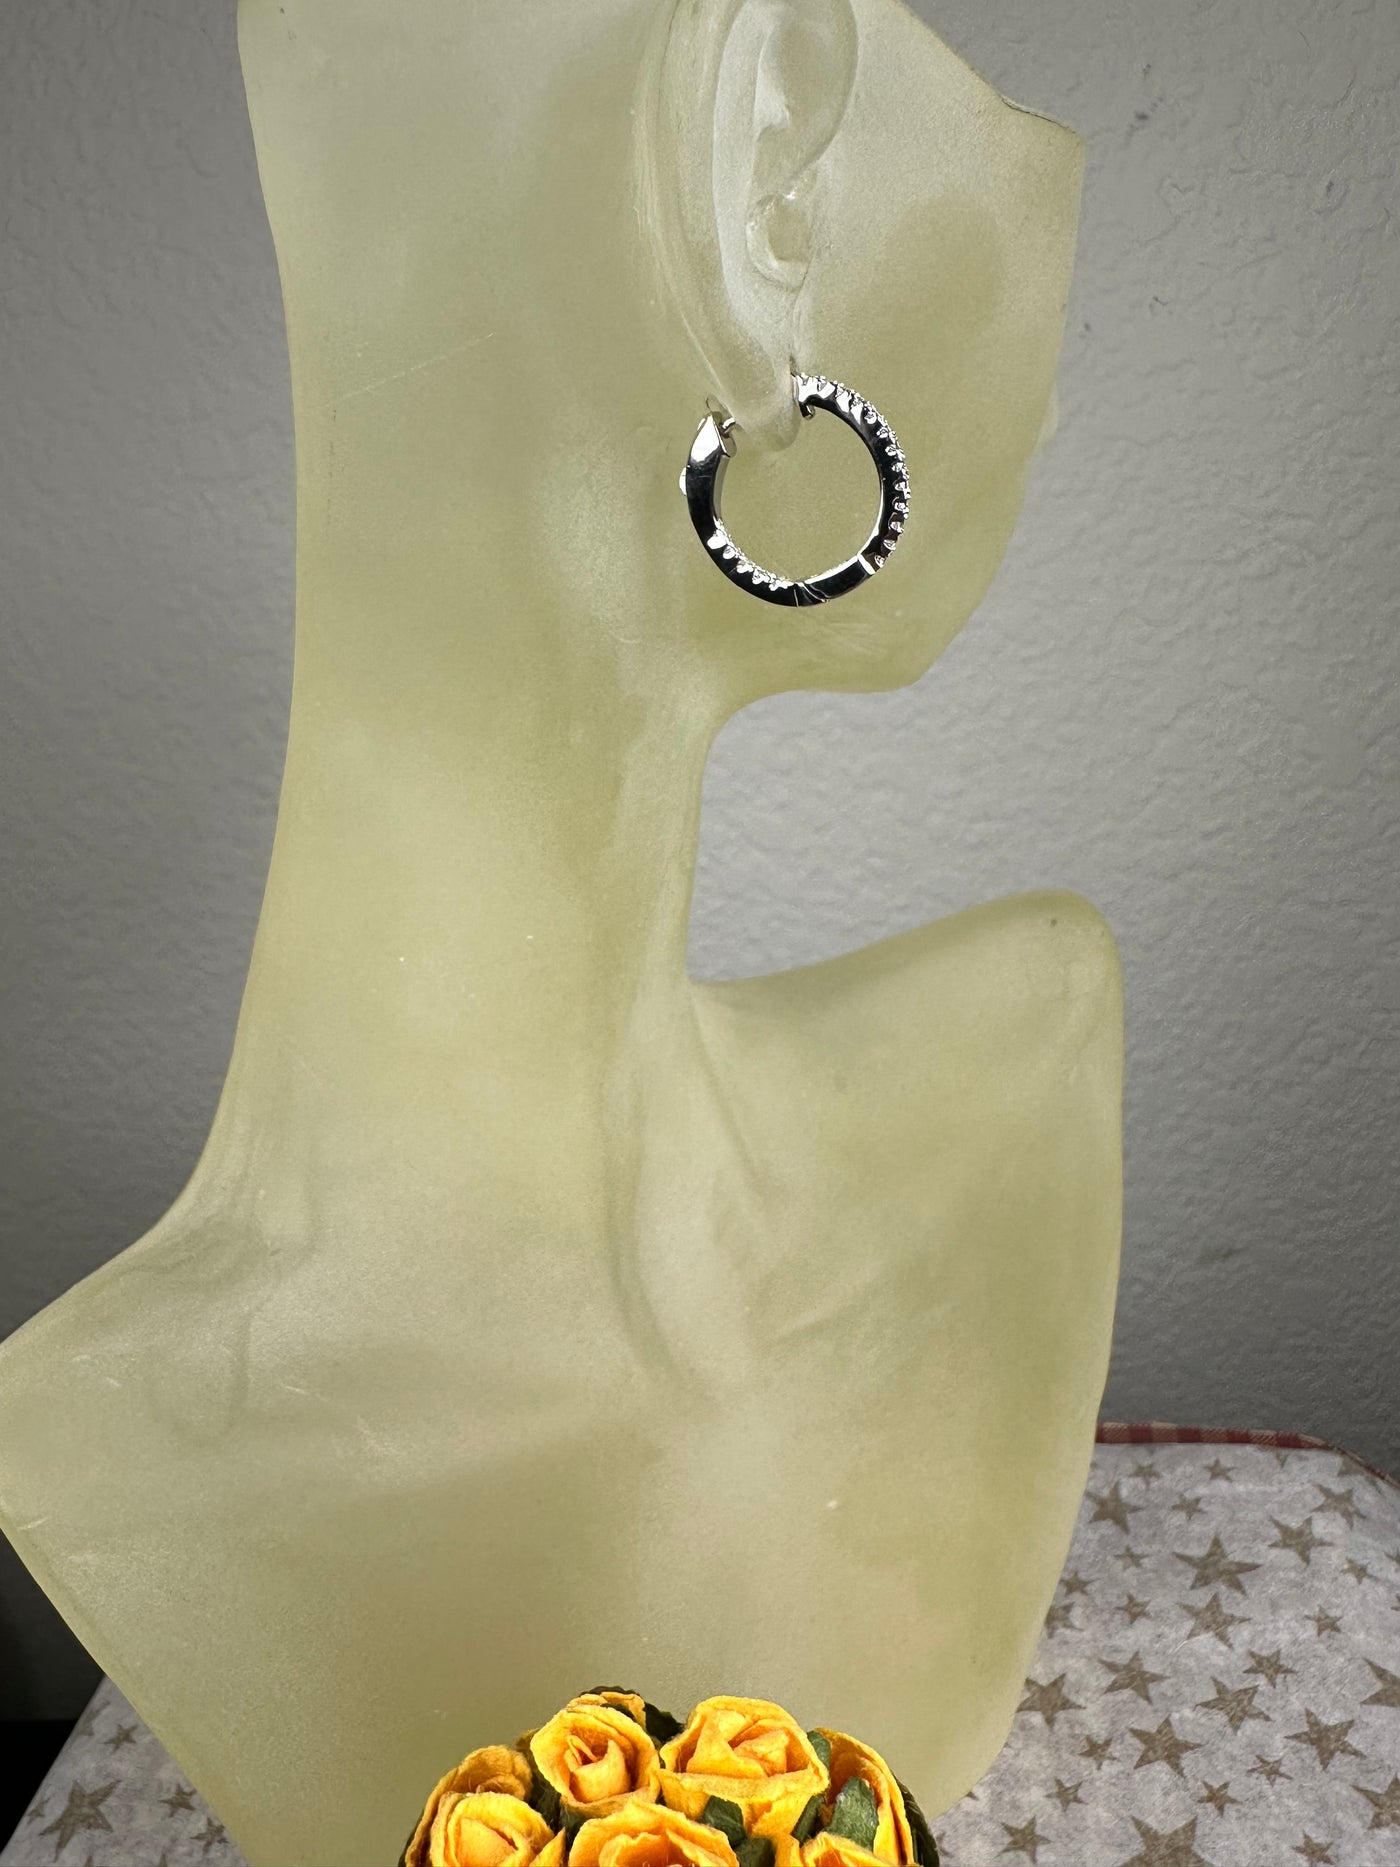 15mm Silver Tone Hoop Earrings with Pave Set Cubic Zirconia